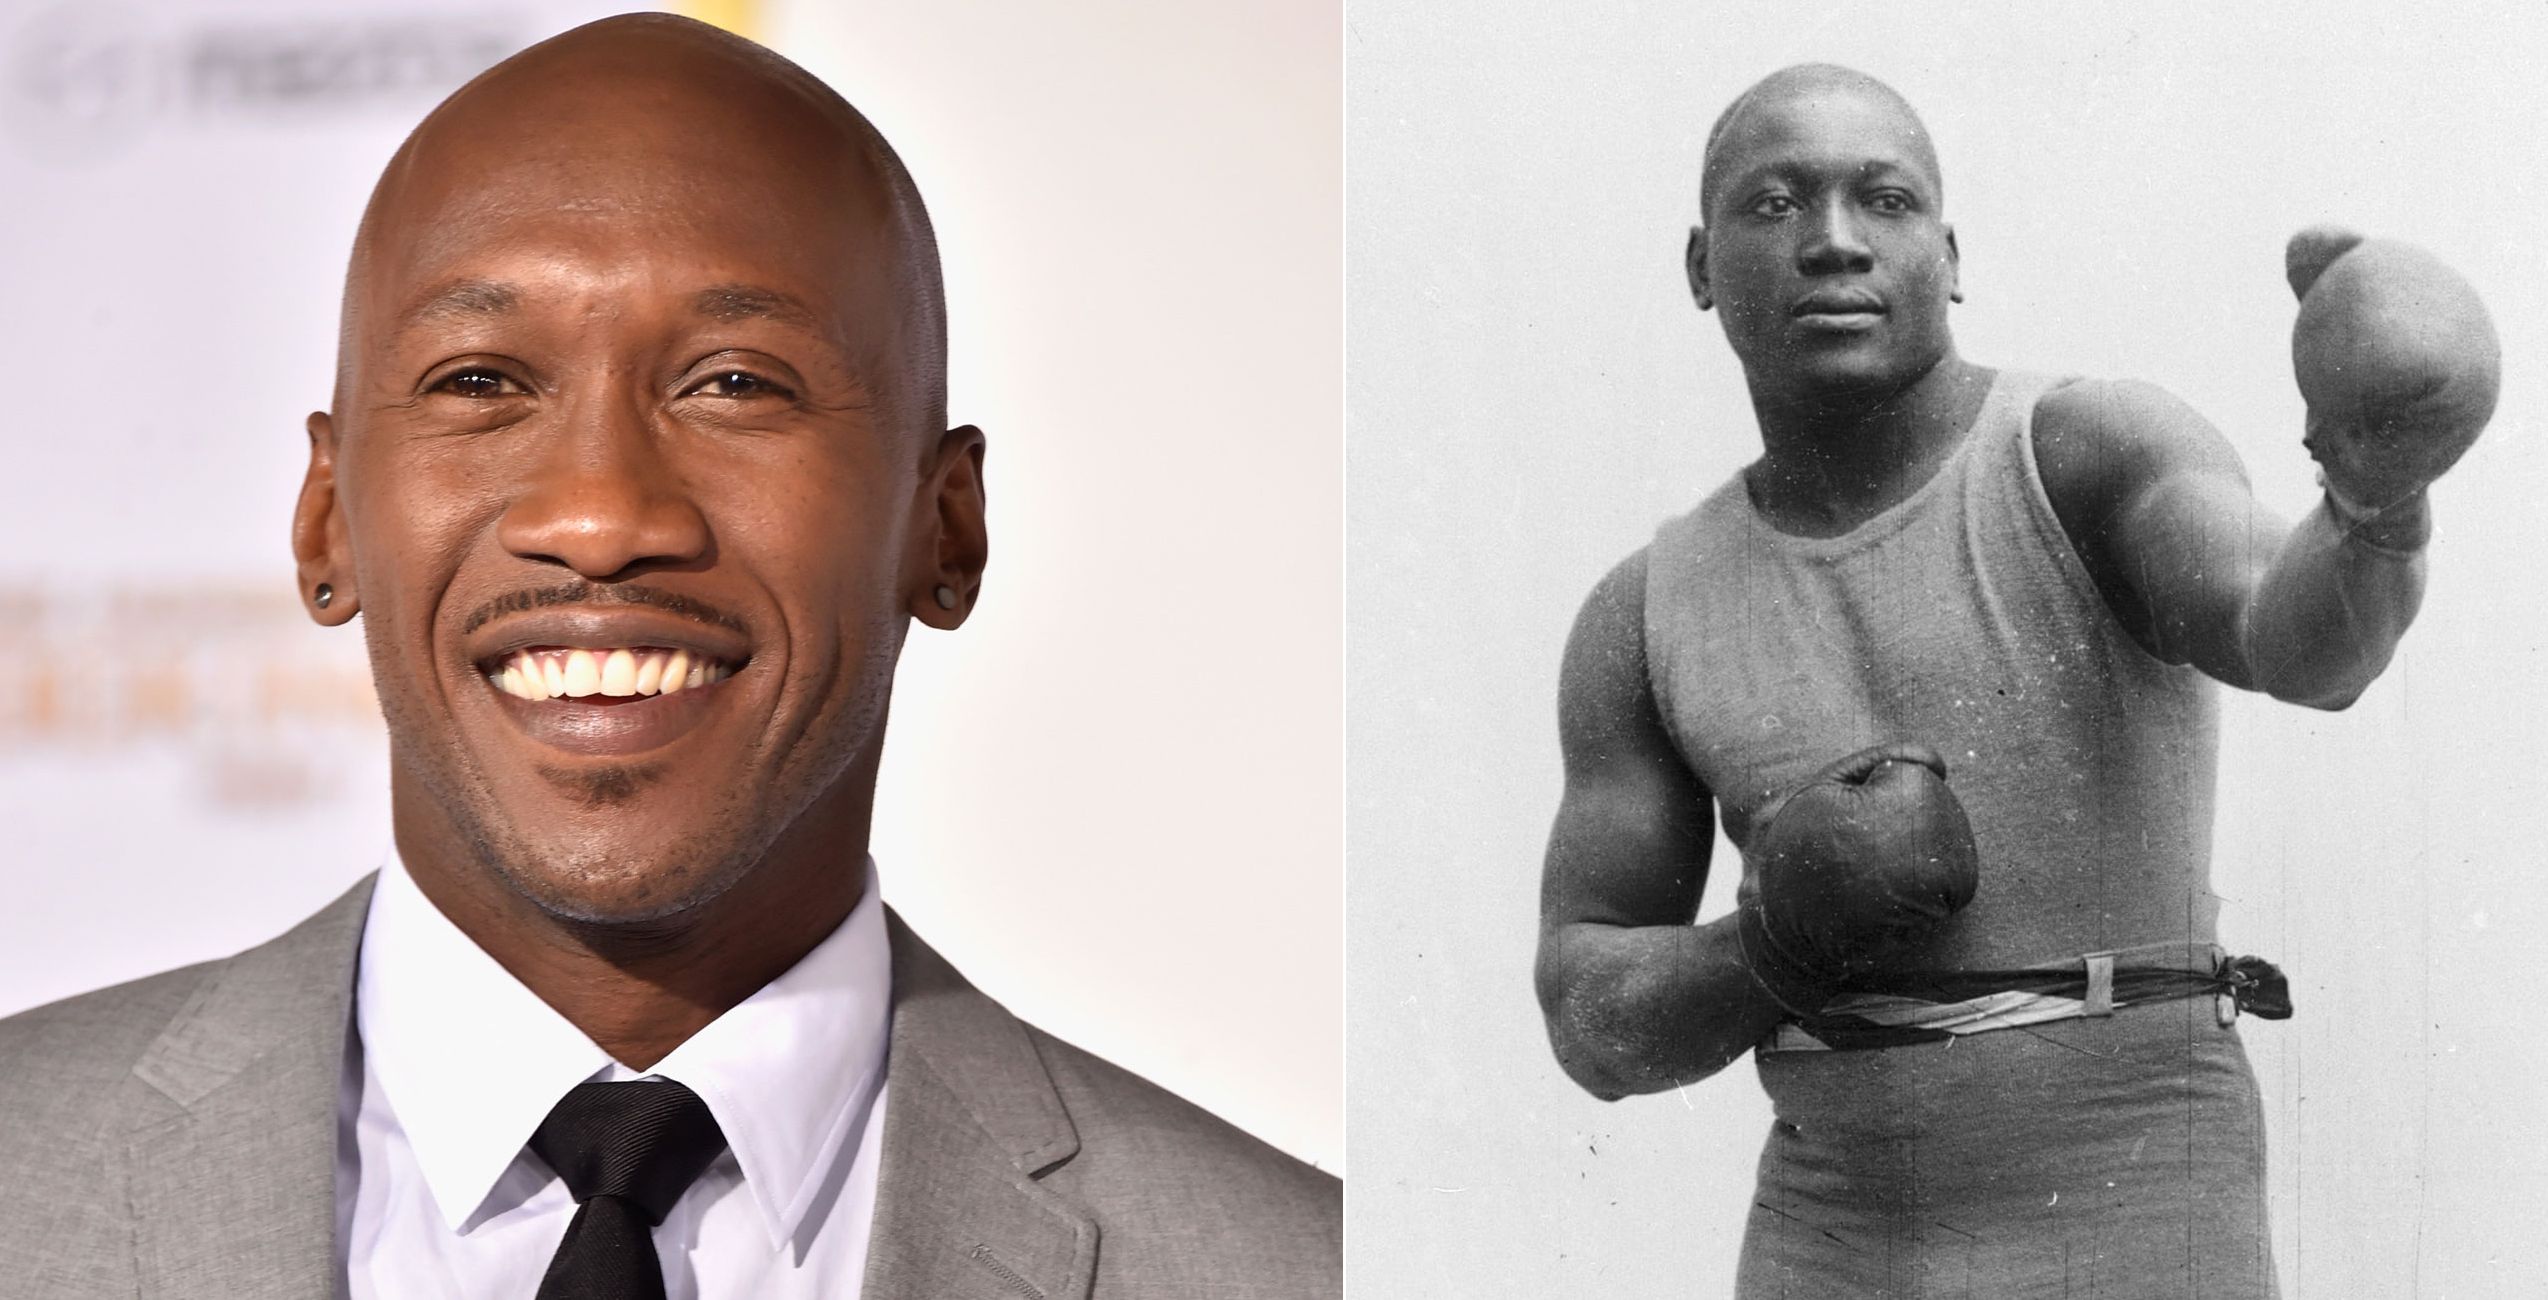 Mahershala Ali Laces Up His Boots As Boxing Legend Jack Johnson For ‘Unruly’